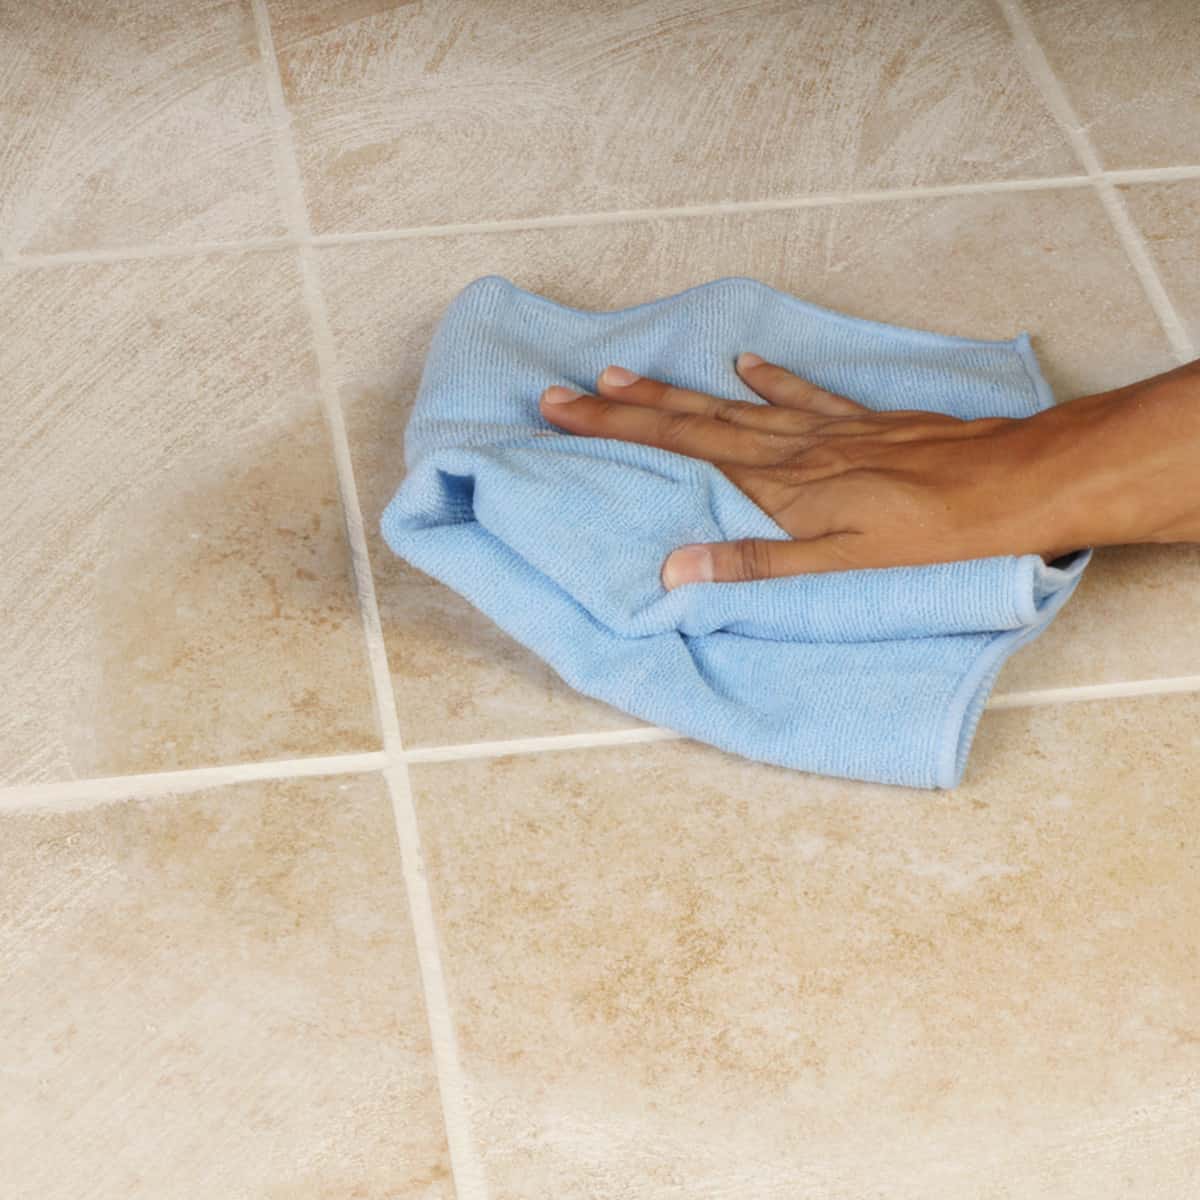 How to Clean Tile Floors 2023 (Guide on Cleaning Tile Floors)